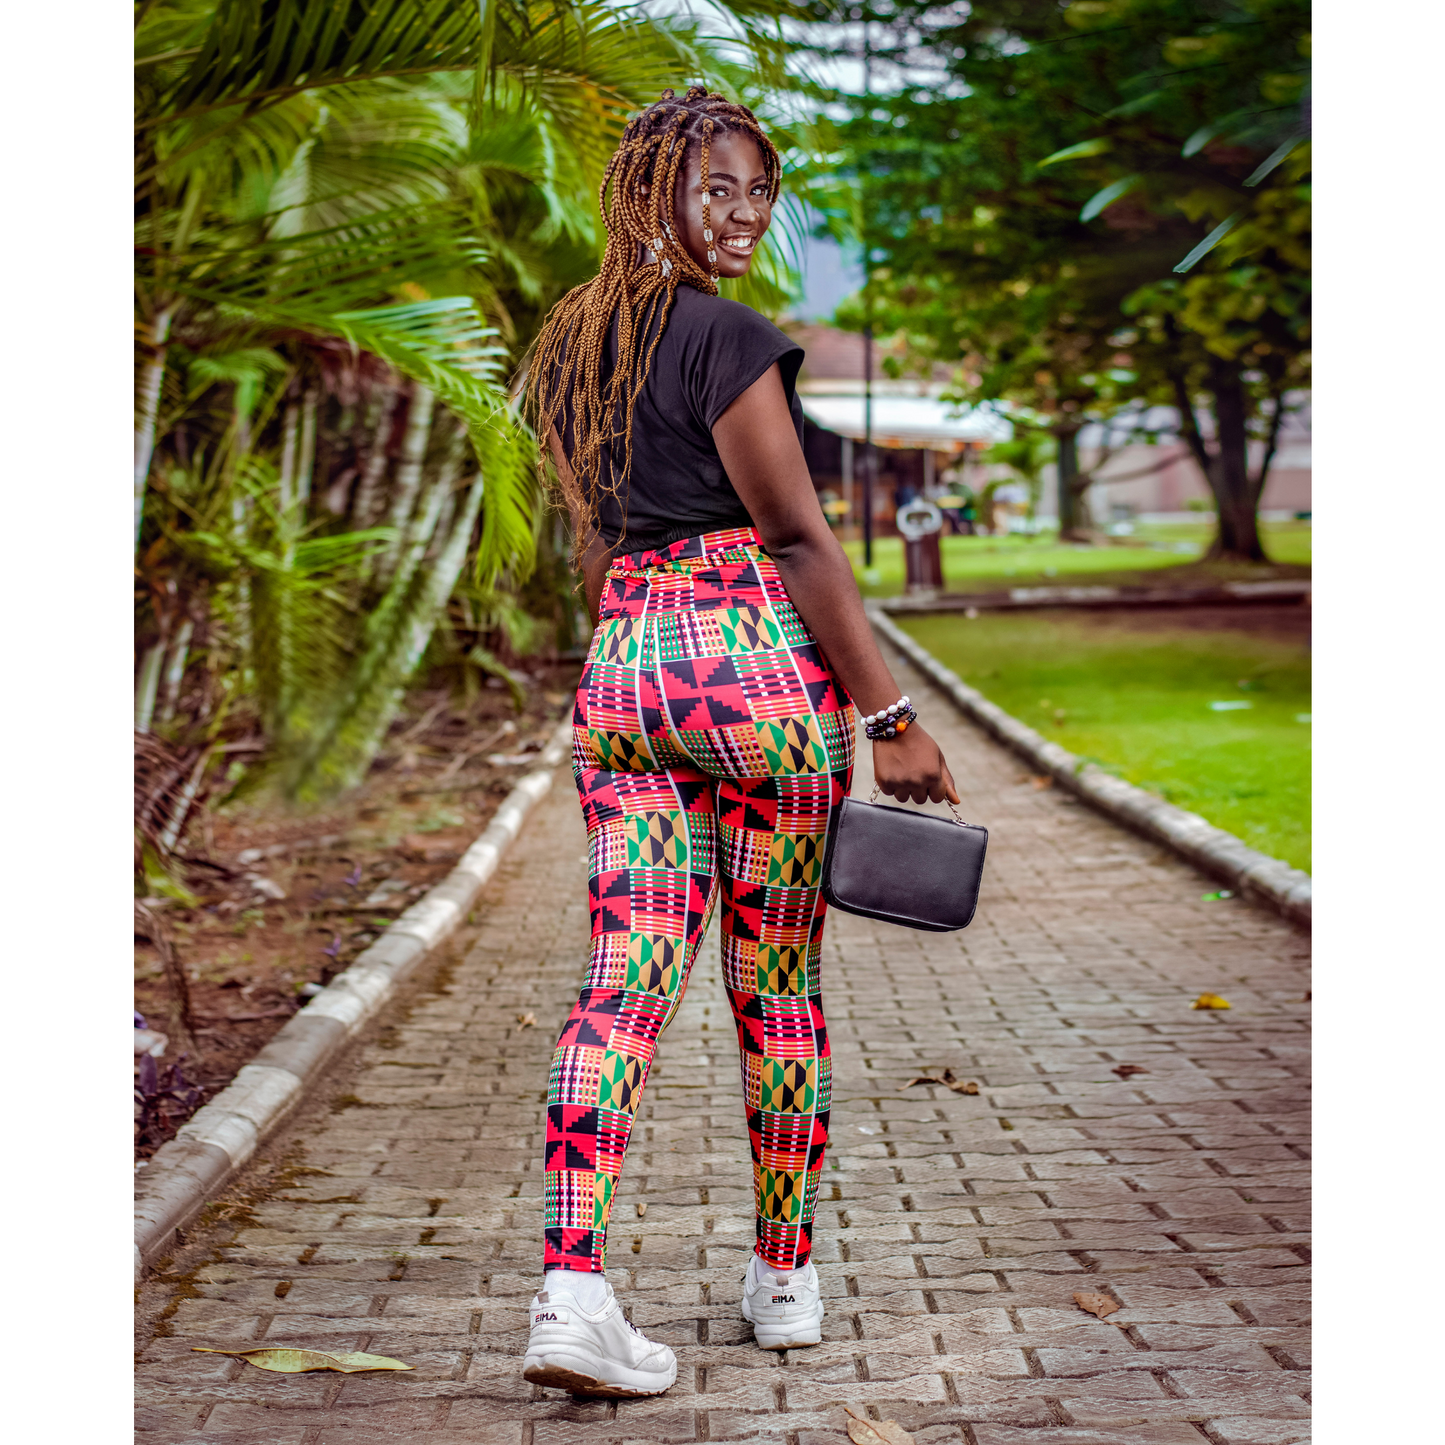 Comfortable Afro Leggings: Experience Vibrancy in Every Wear